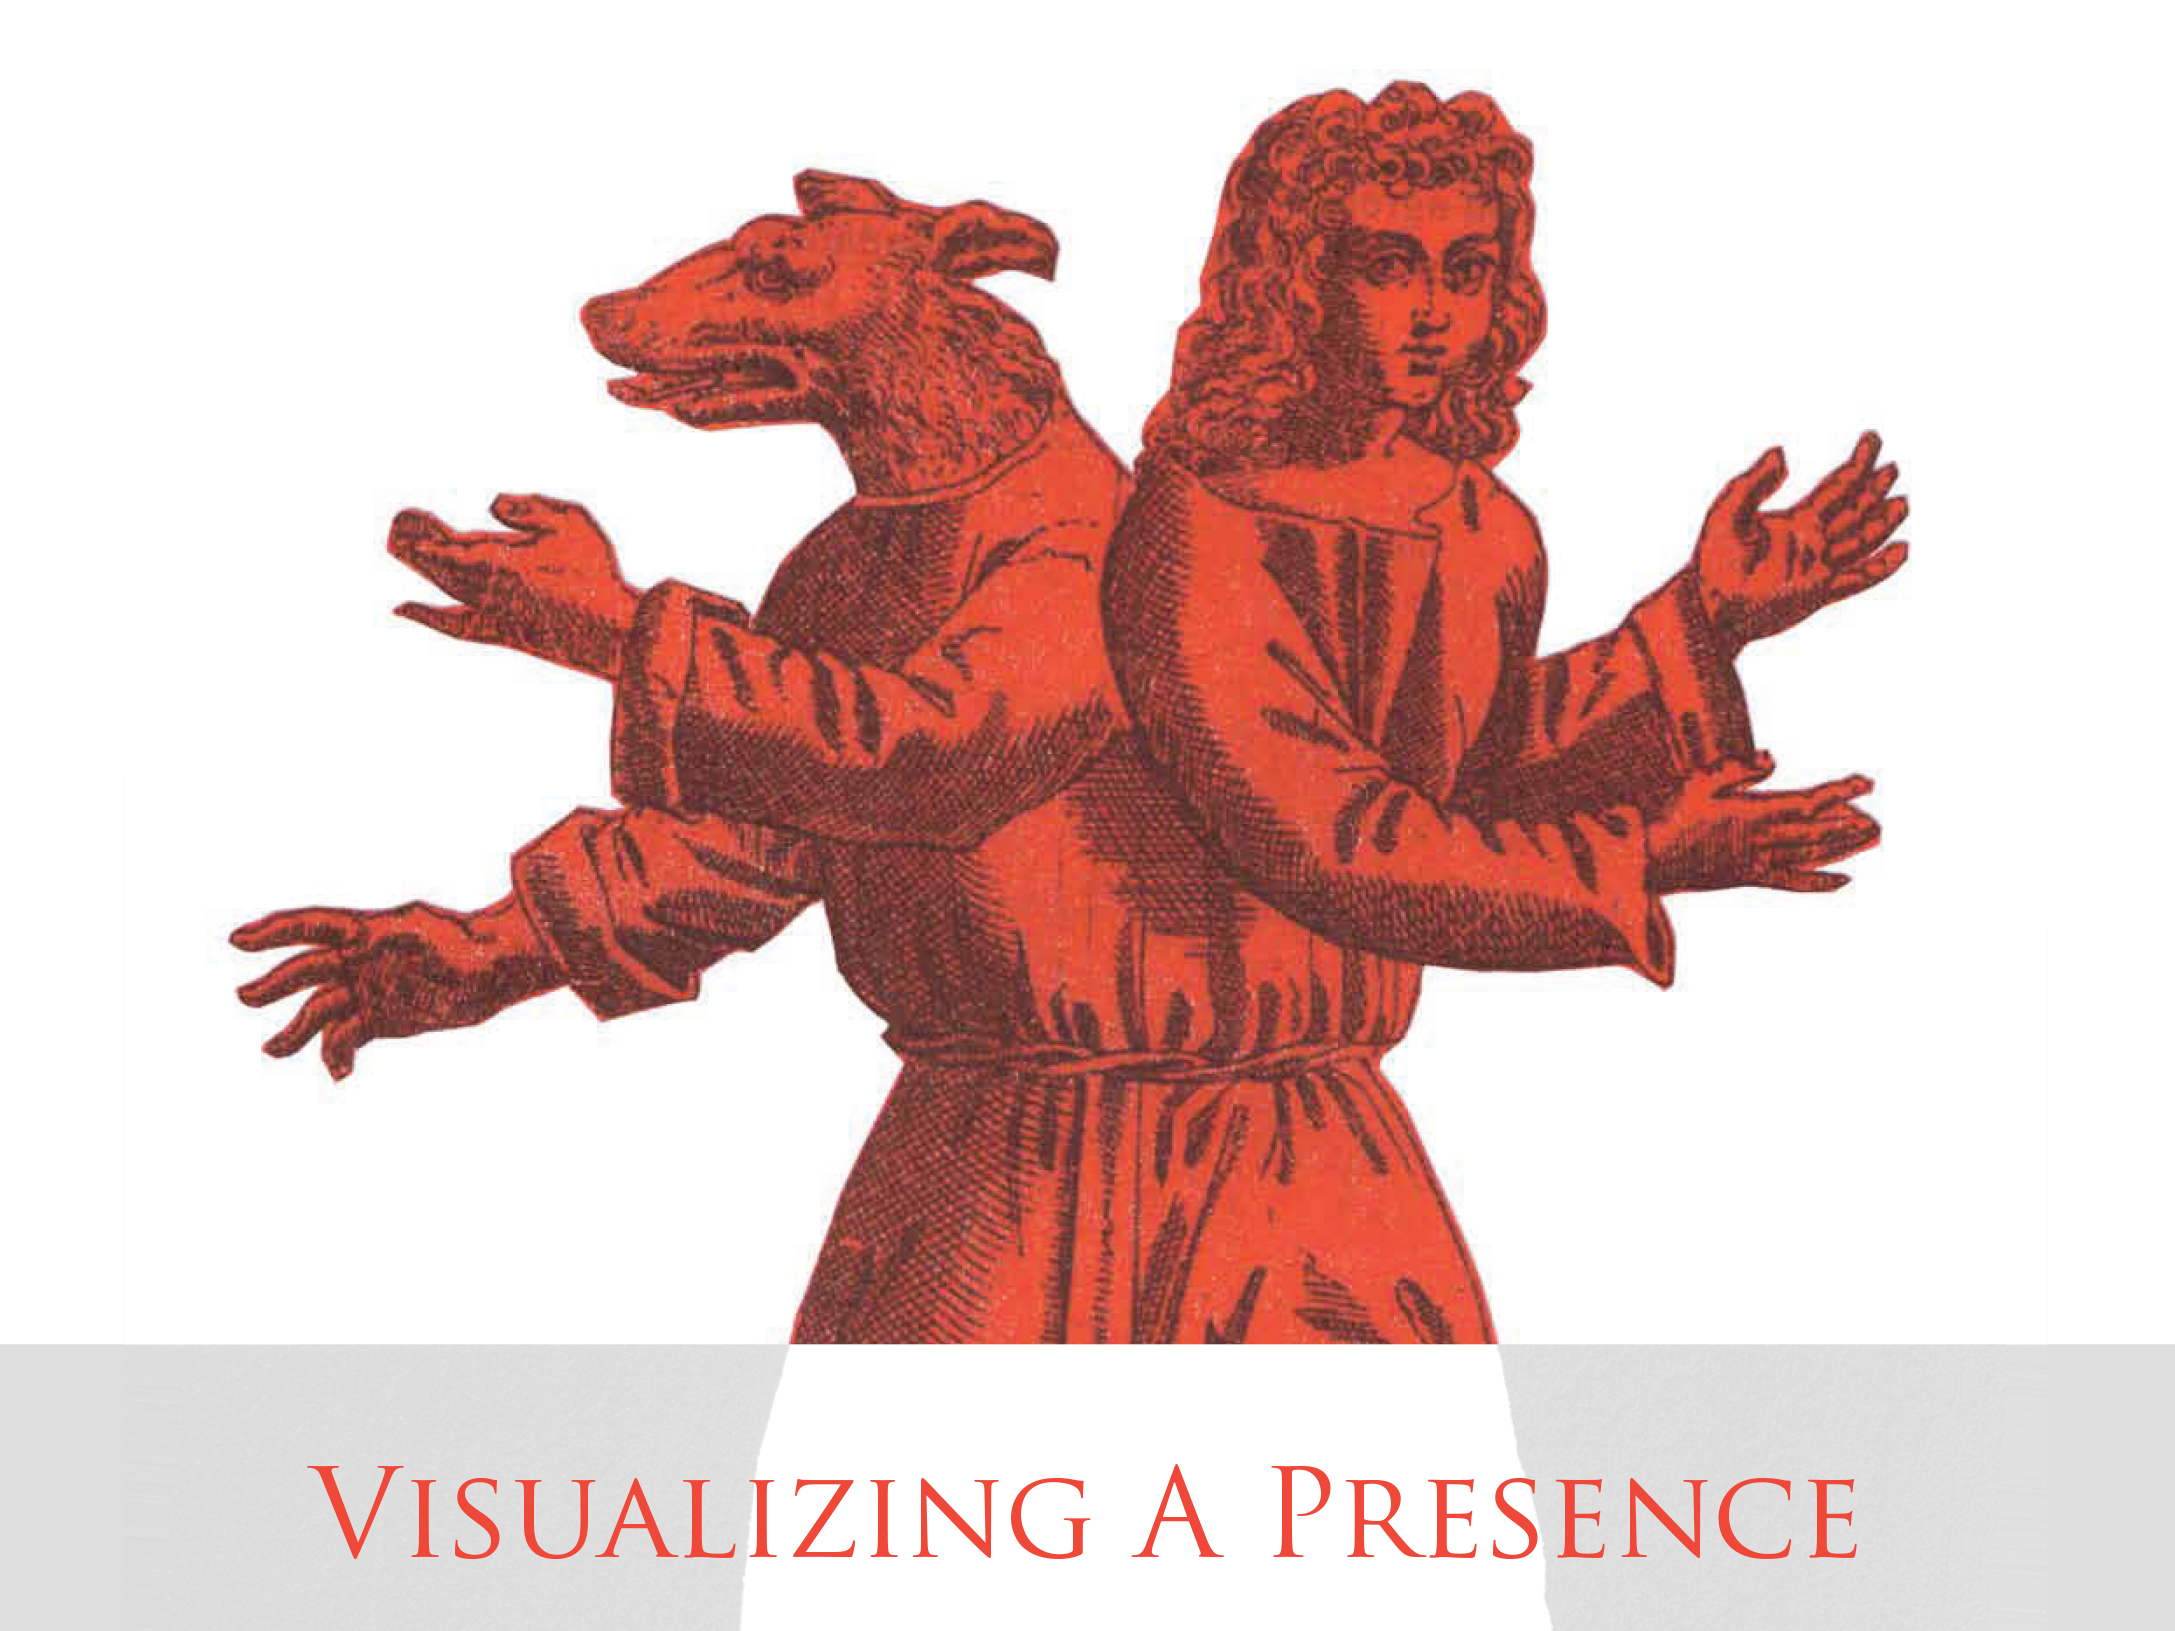 Sarah Lawrence College - Visualizing a Presence